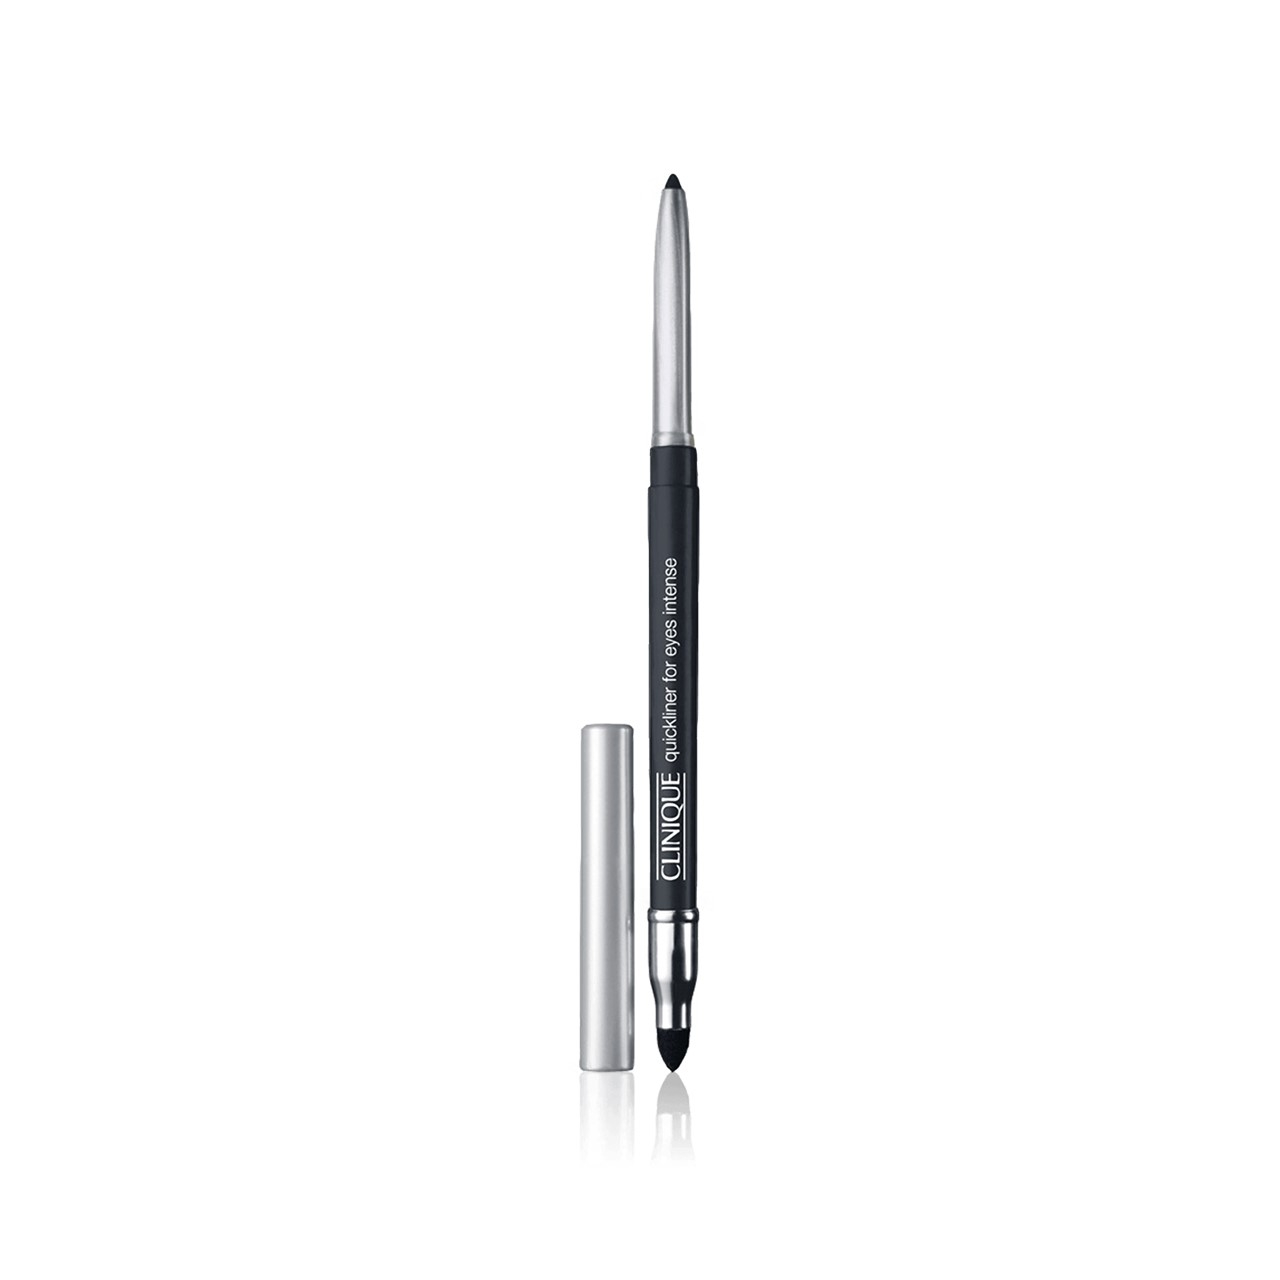 Clinique Quickliner For Eyes Intense Charcoal 0.28g (0.01oz)